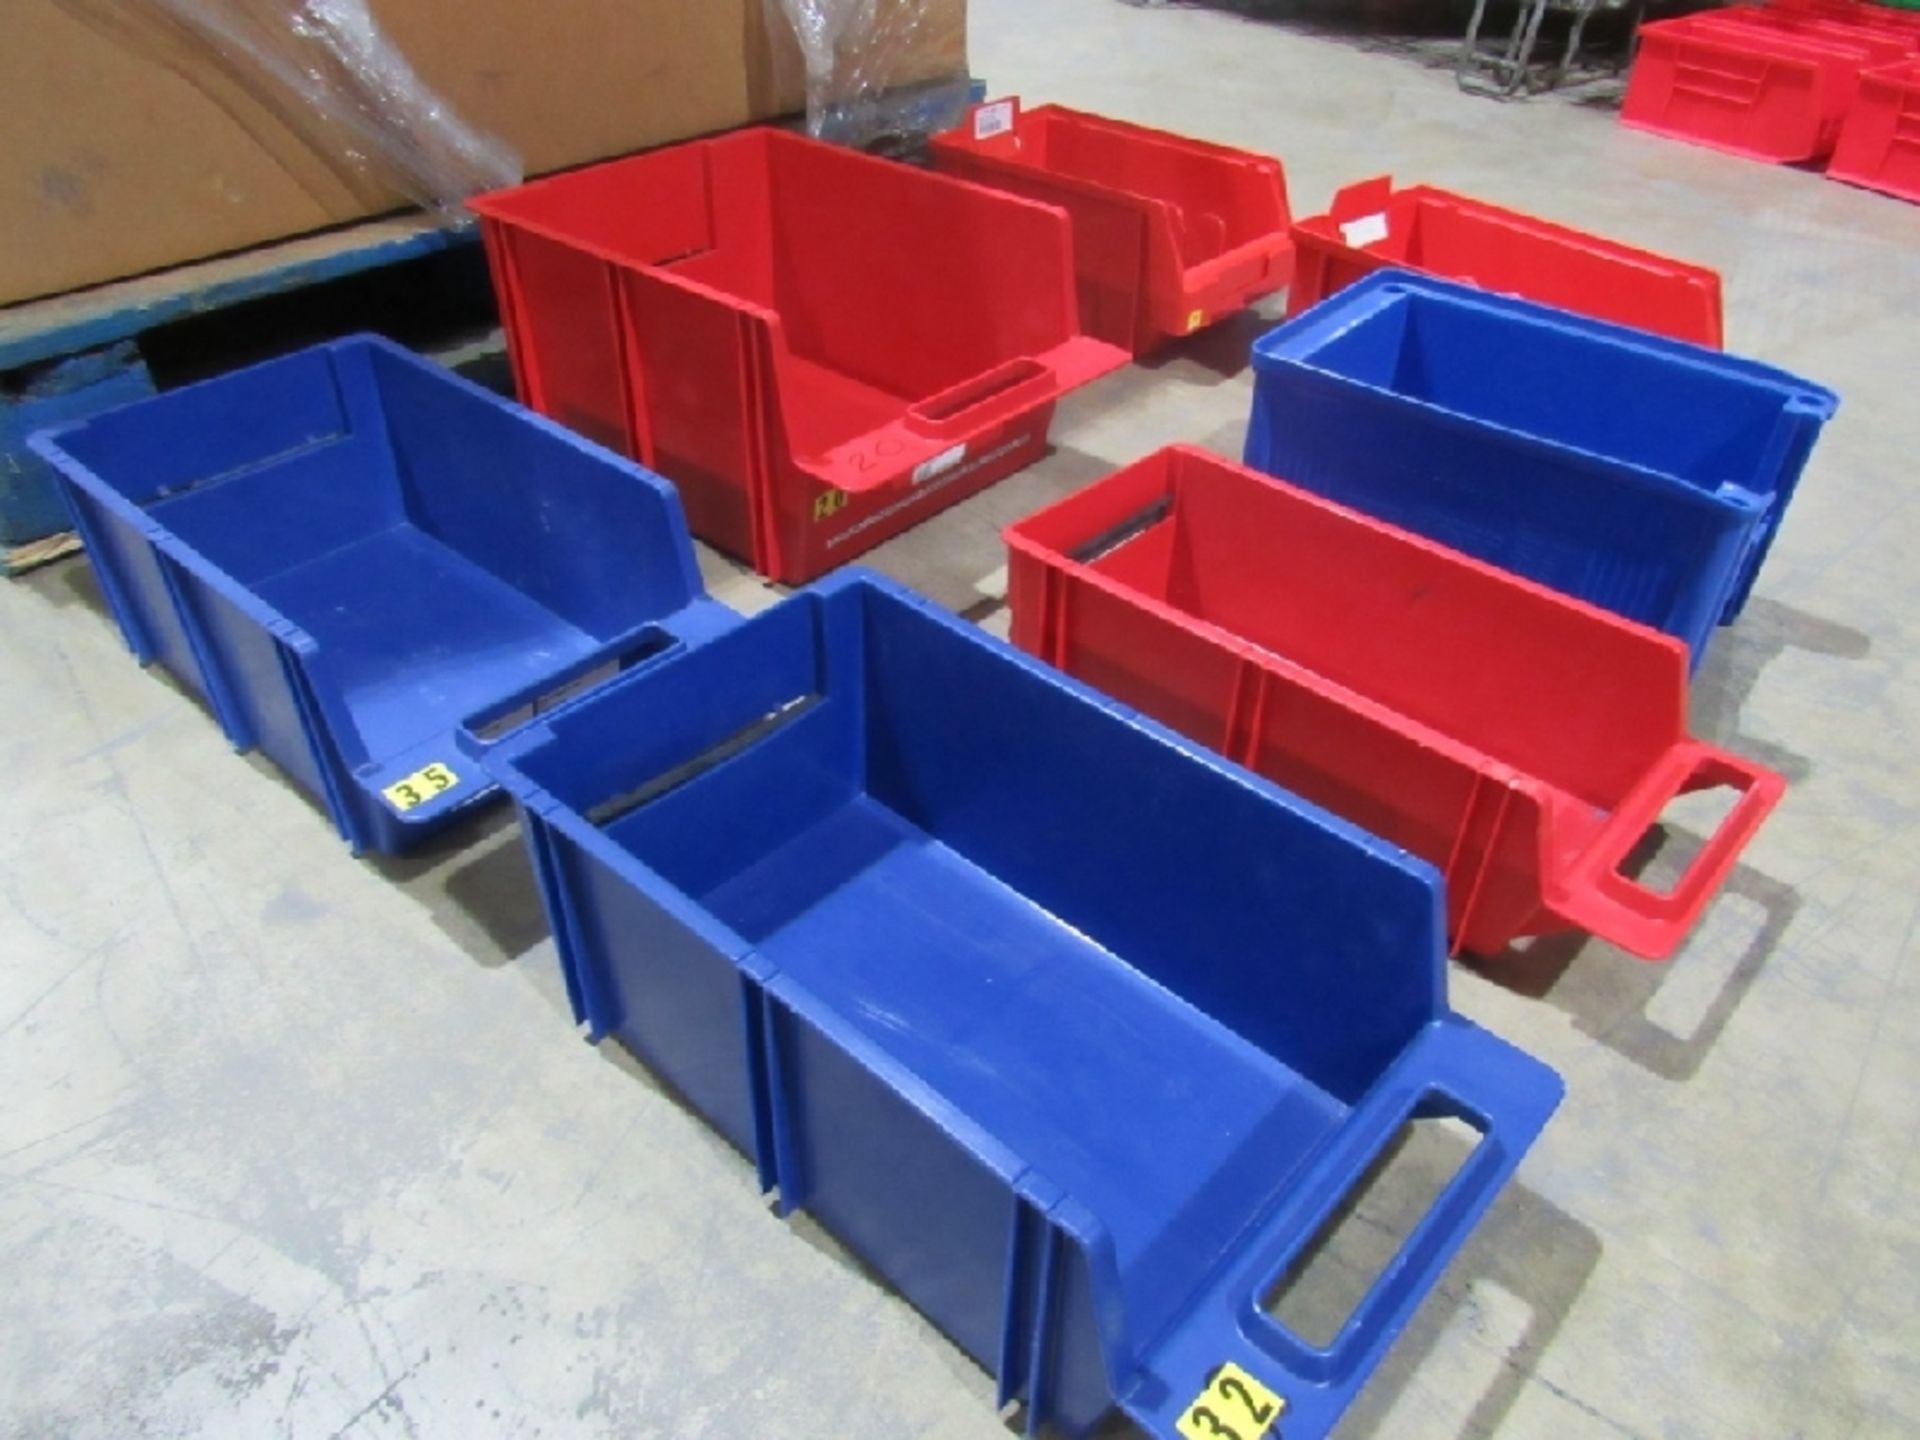 (approx qty - 45) Organizational Bins- ***Located in Chattanooga, TN*** MFR - Unknown Sizes Range - Image 6 of 6